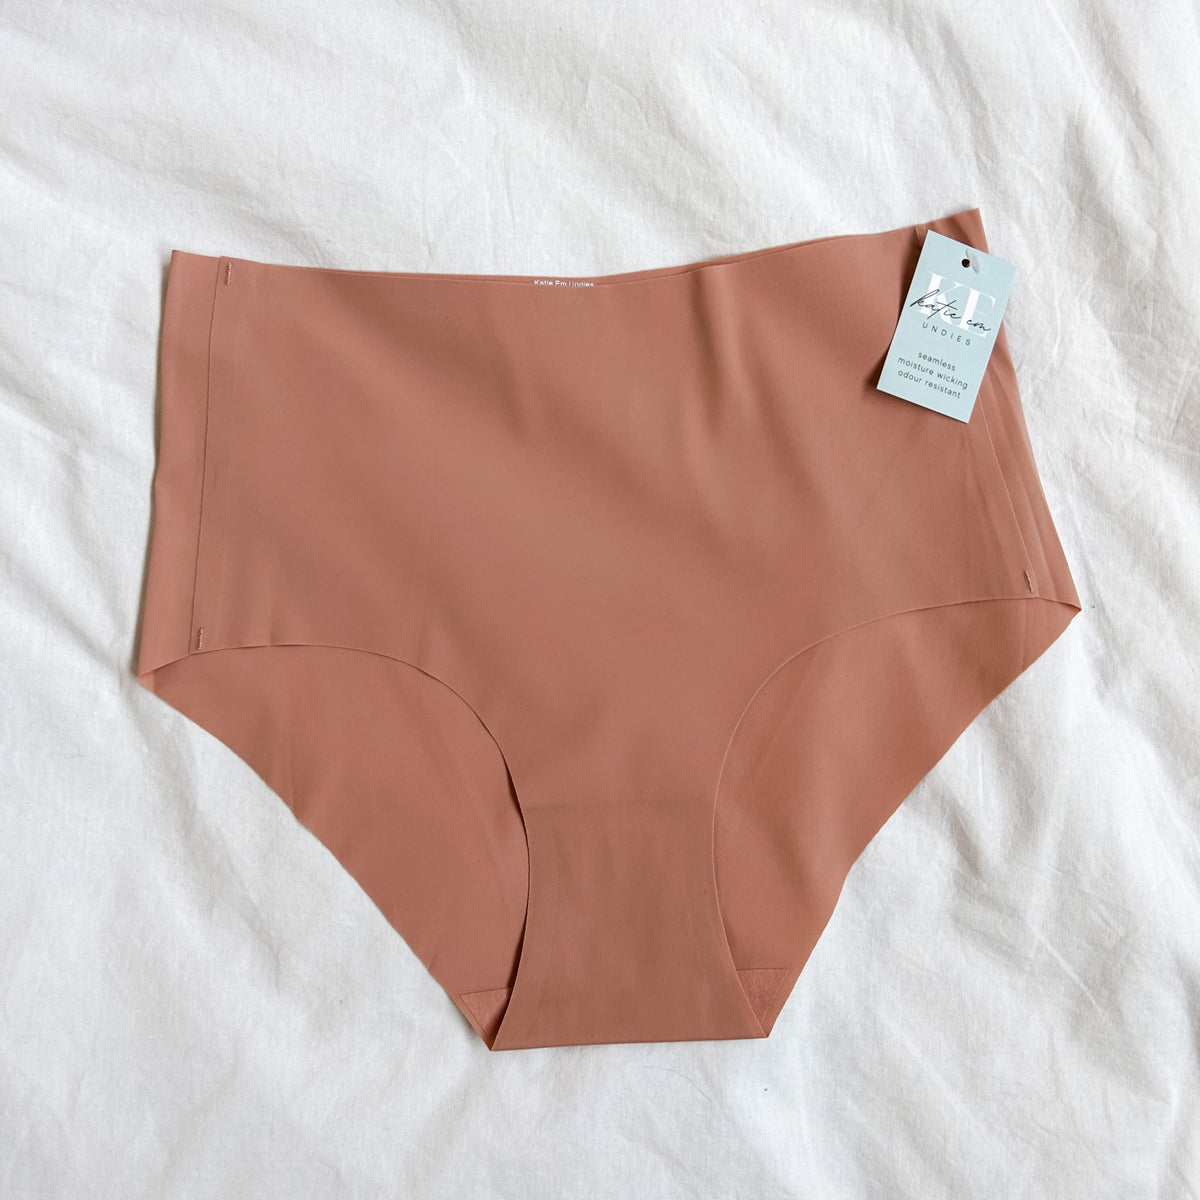 Mid Rise Brief 3 Pack - Size Small